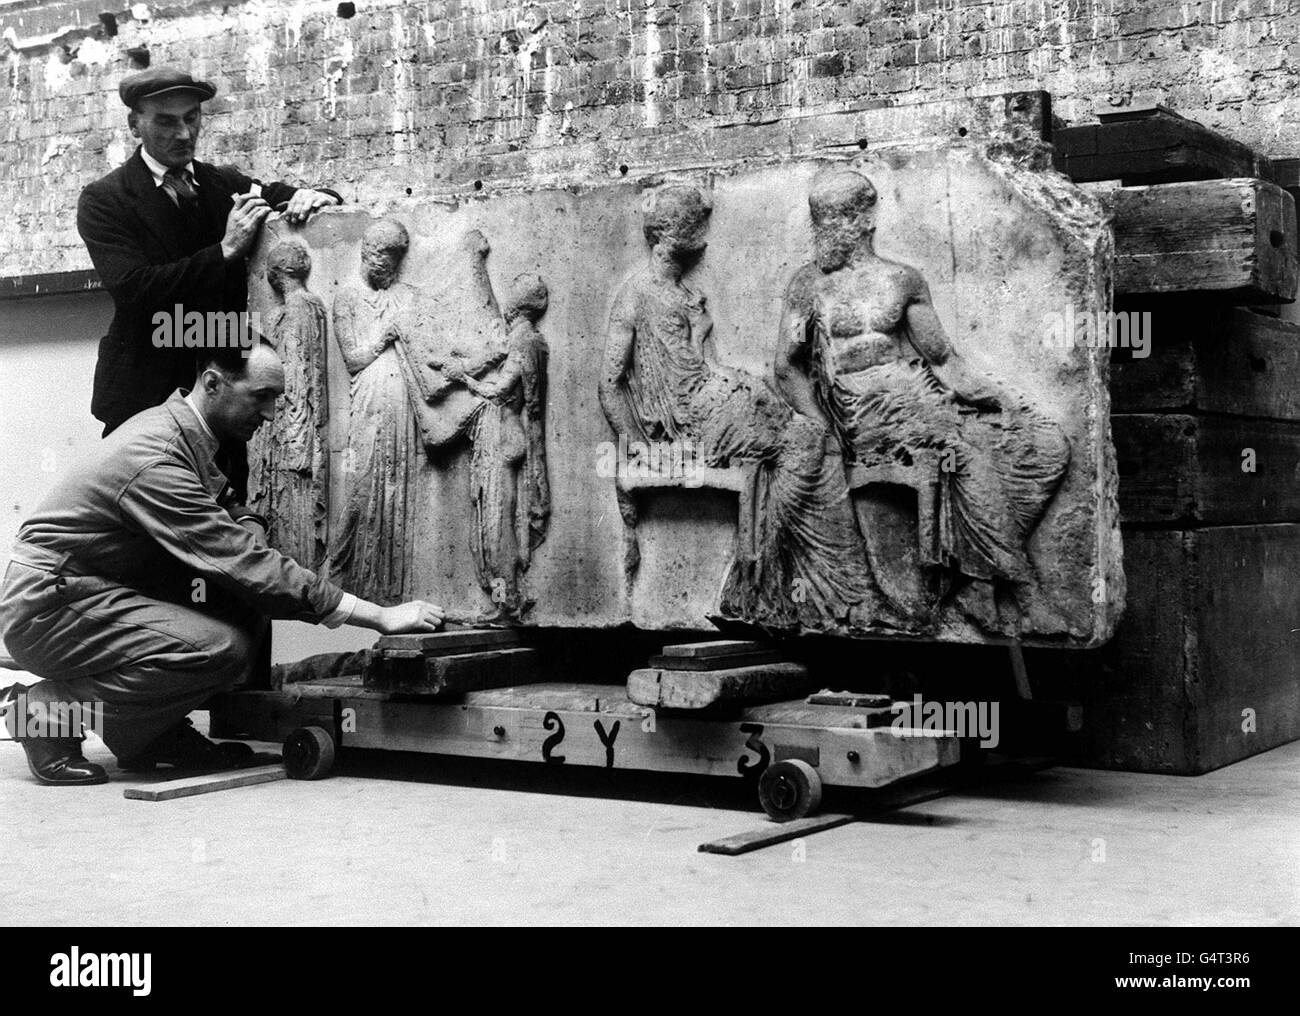 A panel from the Elgin Marbles being handled by porters after being stored in an underground tunnel for safety during the Second World War. The marbles date from 432BC and formerly graced the Parthenon on the Athenian Acropolis. *The picture shows the centre slab of the frieze of the Elgin marbles featuring the patron goddess of Athens, Athena. The marbles also depict gods and mortals attending the Panatheniac procession held annually in the city of Athens to celebrate the birthday of Athena. *20/11/1999 - A reported call by President Clinton to return the Elgin marbles to Greece was angrily Stock Photo